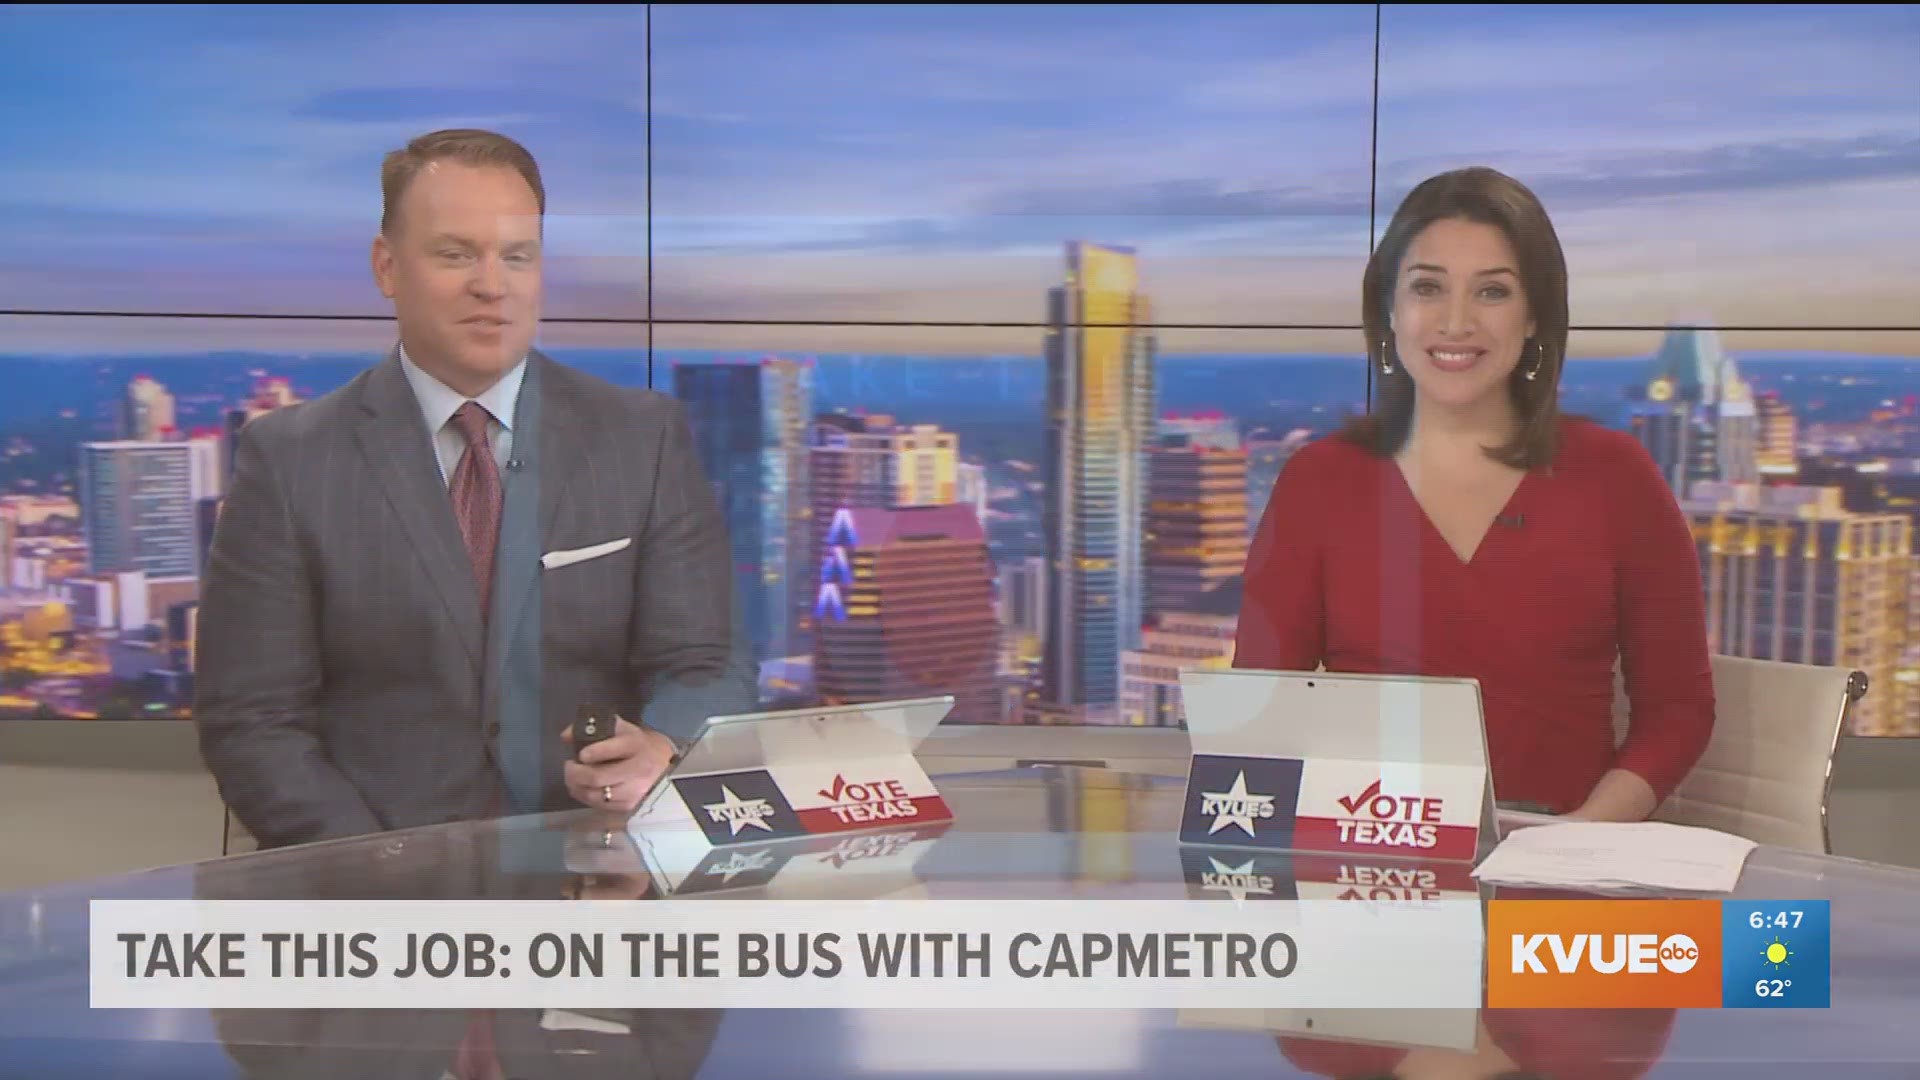 KVUE's Anavid Reyes tries her hand with CAPMETRO to help run the Metro Express transit system.